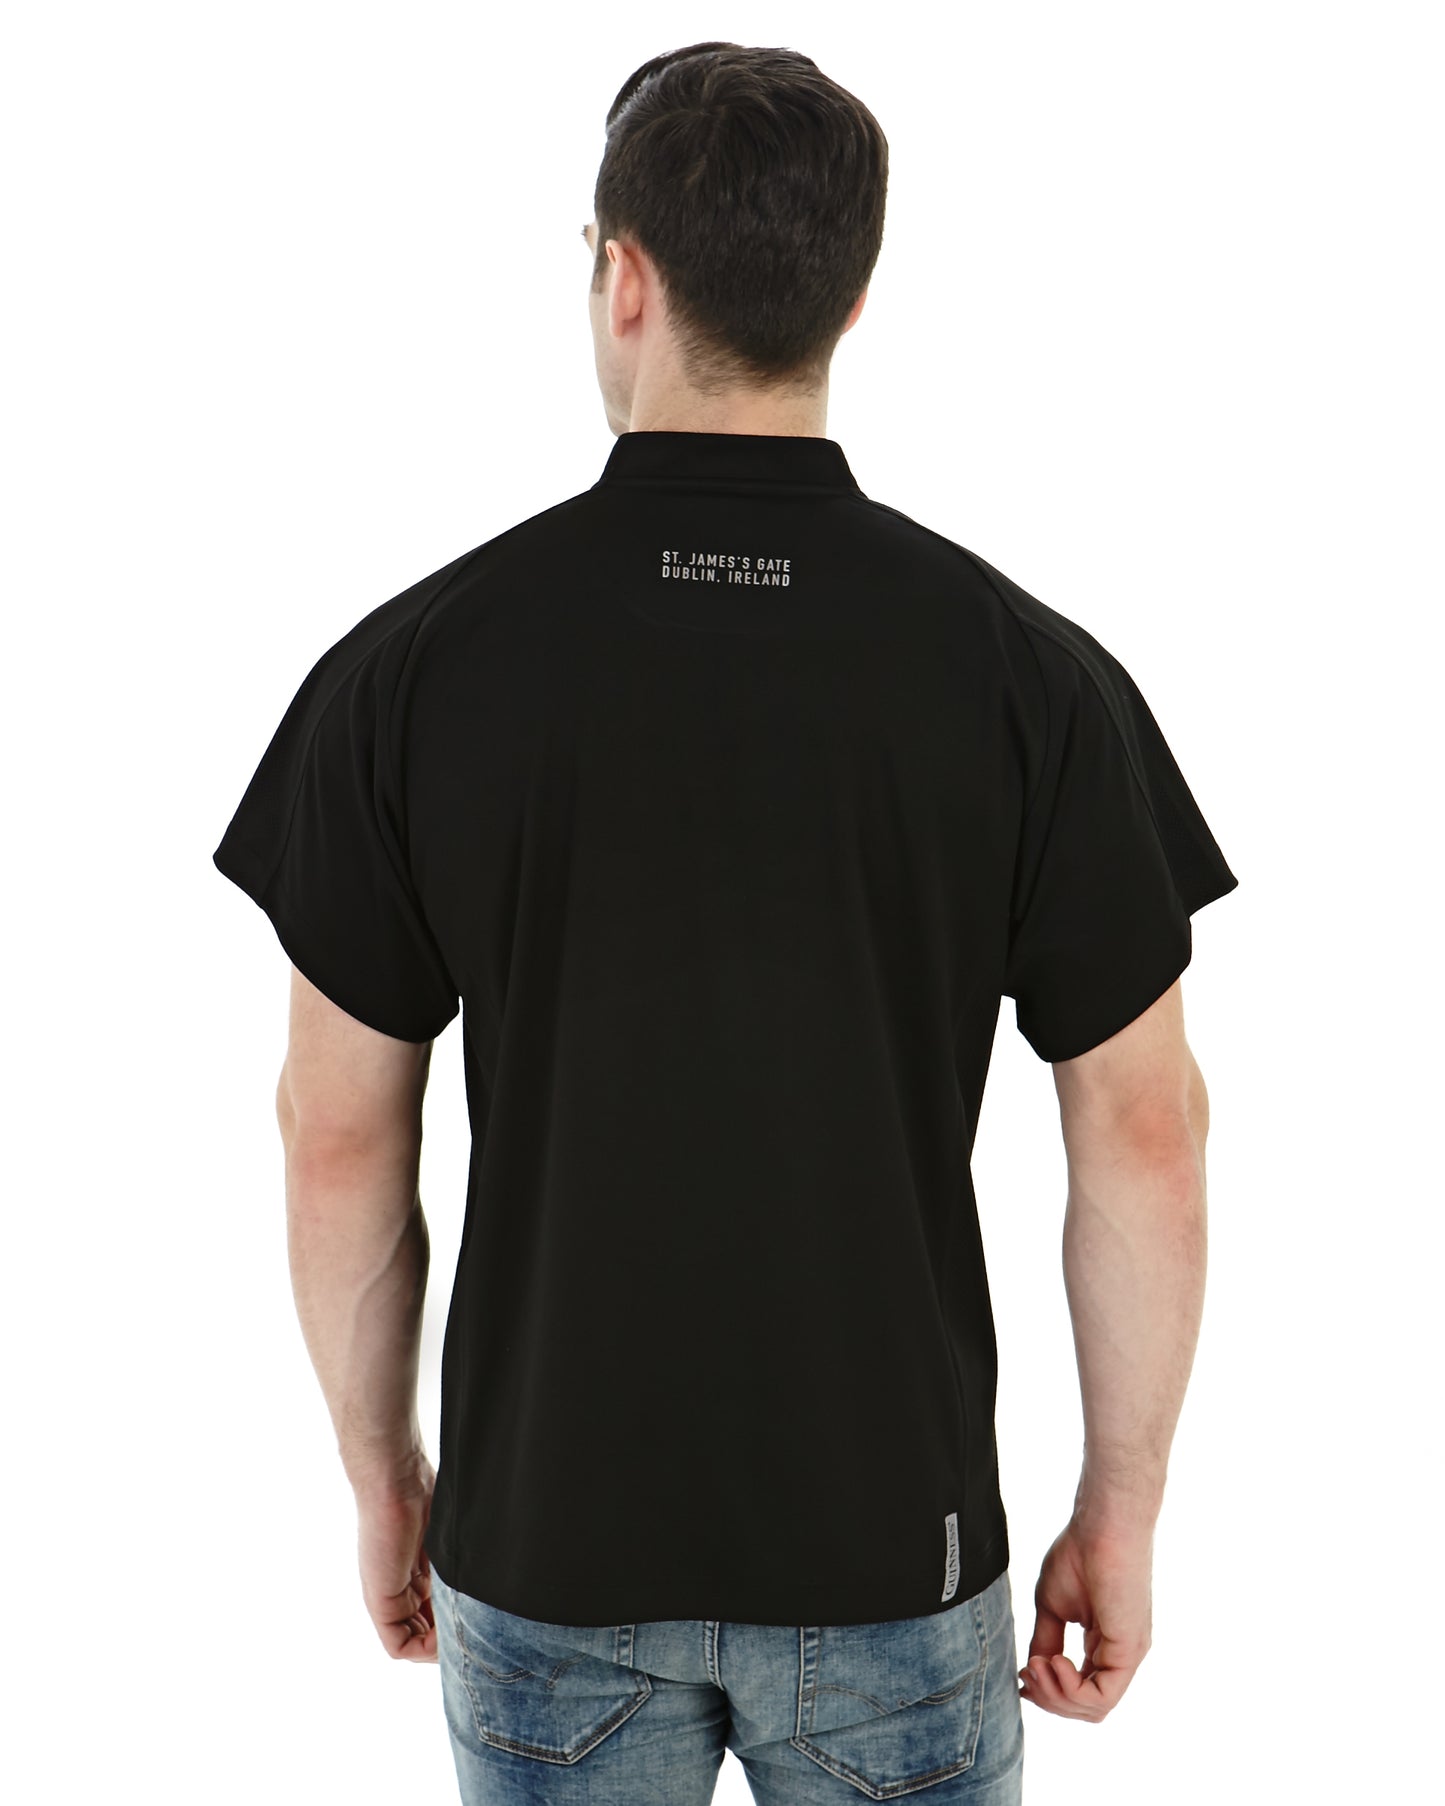 All Black Rugby Jersey